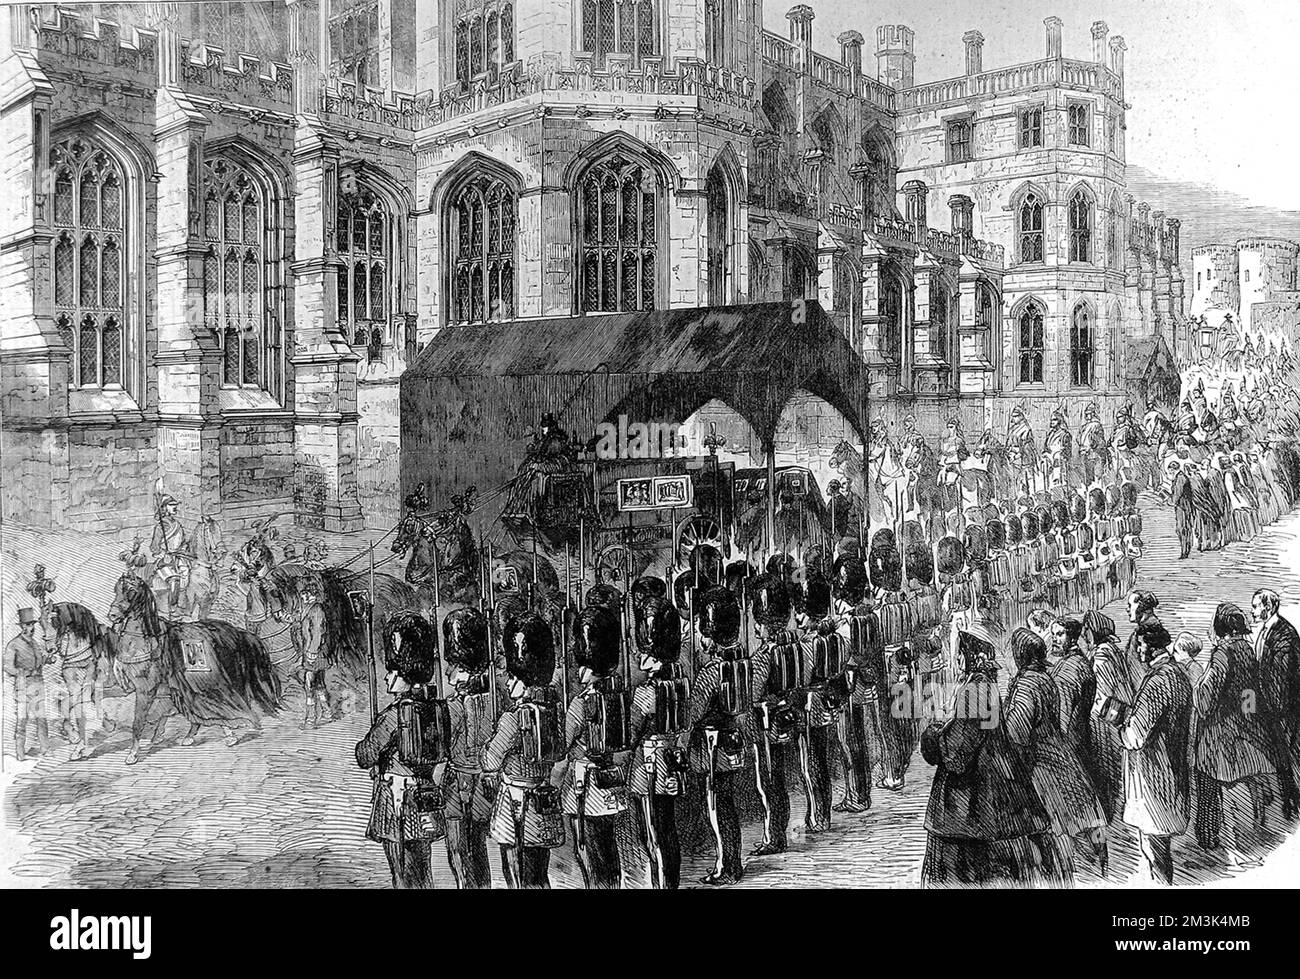 The Funeral of the late Prince Albert, husband of Queen Victoria. The hearse drawn by horses is at St. George's Chapel flanked by a Guard of Honour. The funeral procession is witnessed by crowds of mourners.     Date: January 1862 Stock Photo